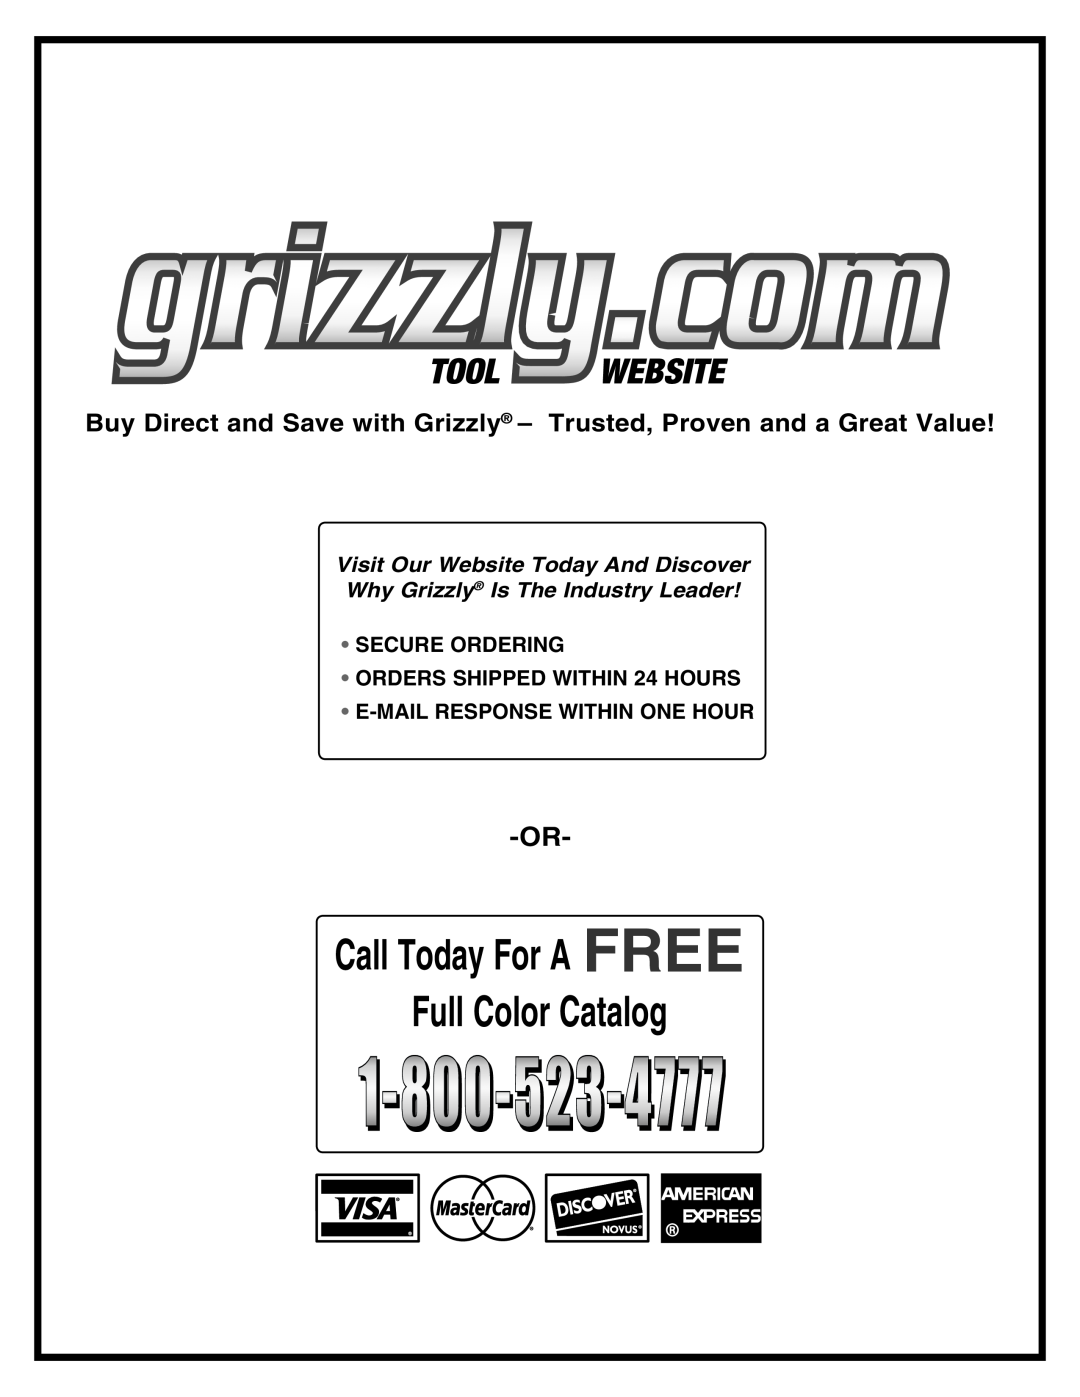 Grizzly g0669X owner manual Ull #Olorl#Atalog, s 3%#52% /2$%2, s /2$%23 300%$074.  /523, s %-!, 2%30/.3%274. /.%./52 